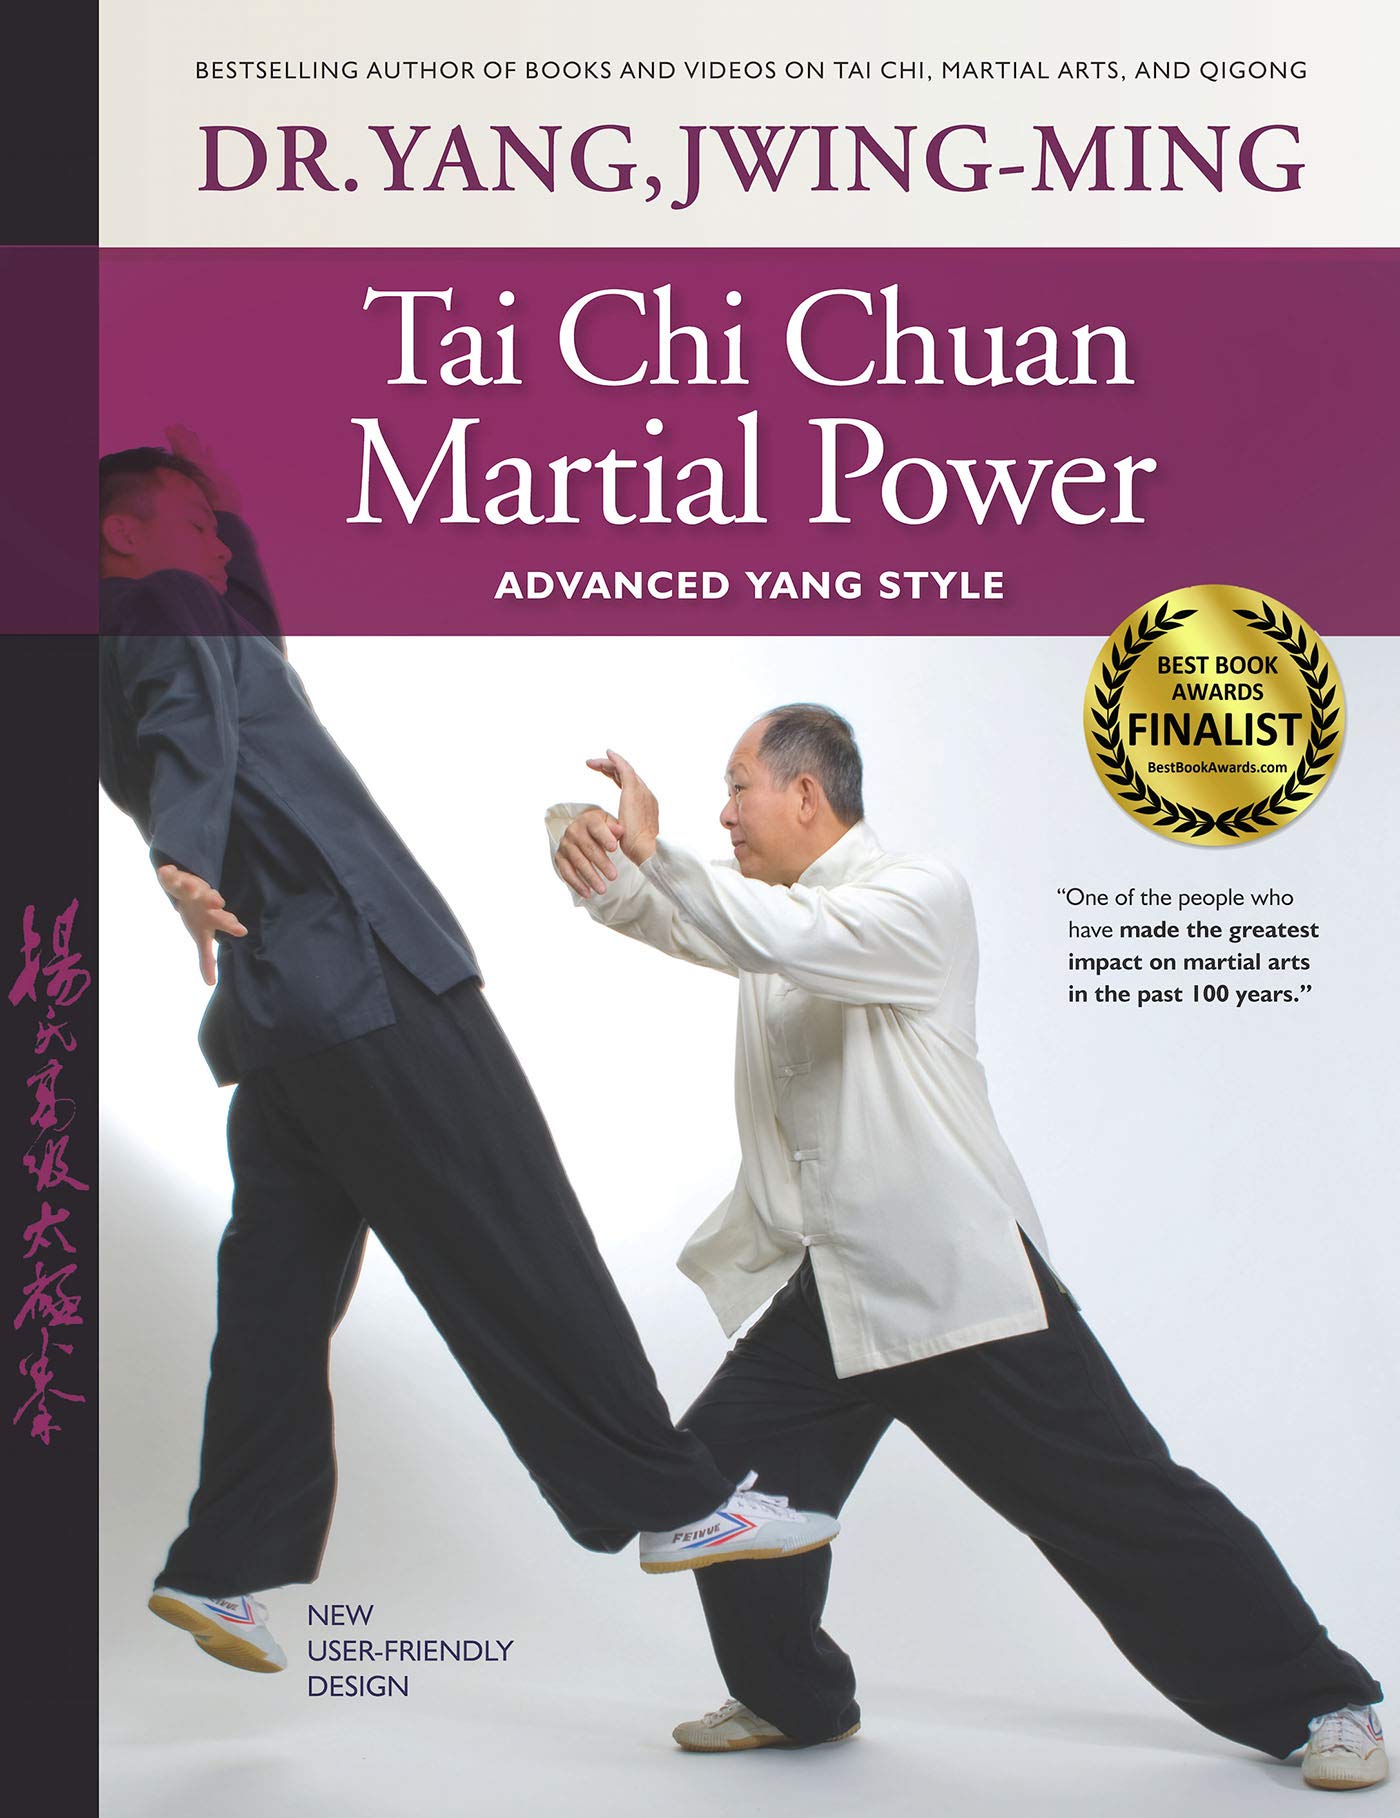 Tai Chi Chuan Martial Power: Advanced Yang Style Book by Dr Yang, Jwing Ming - Budovideos Inc